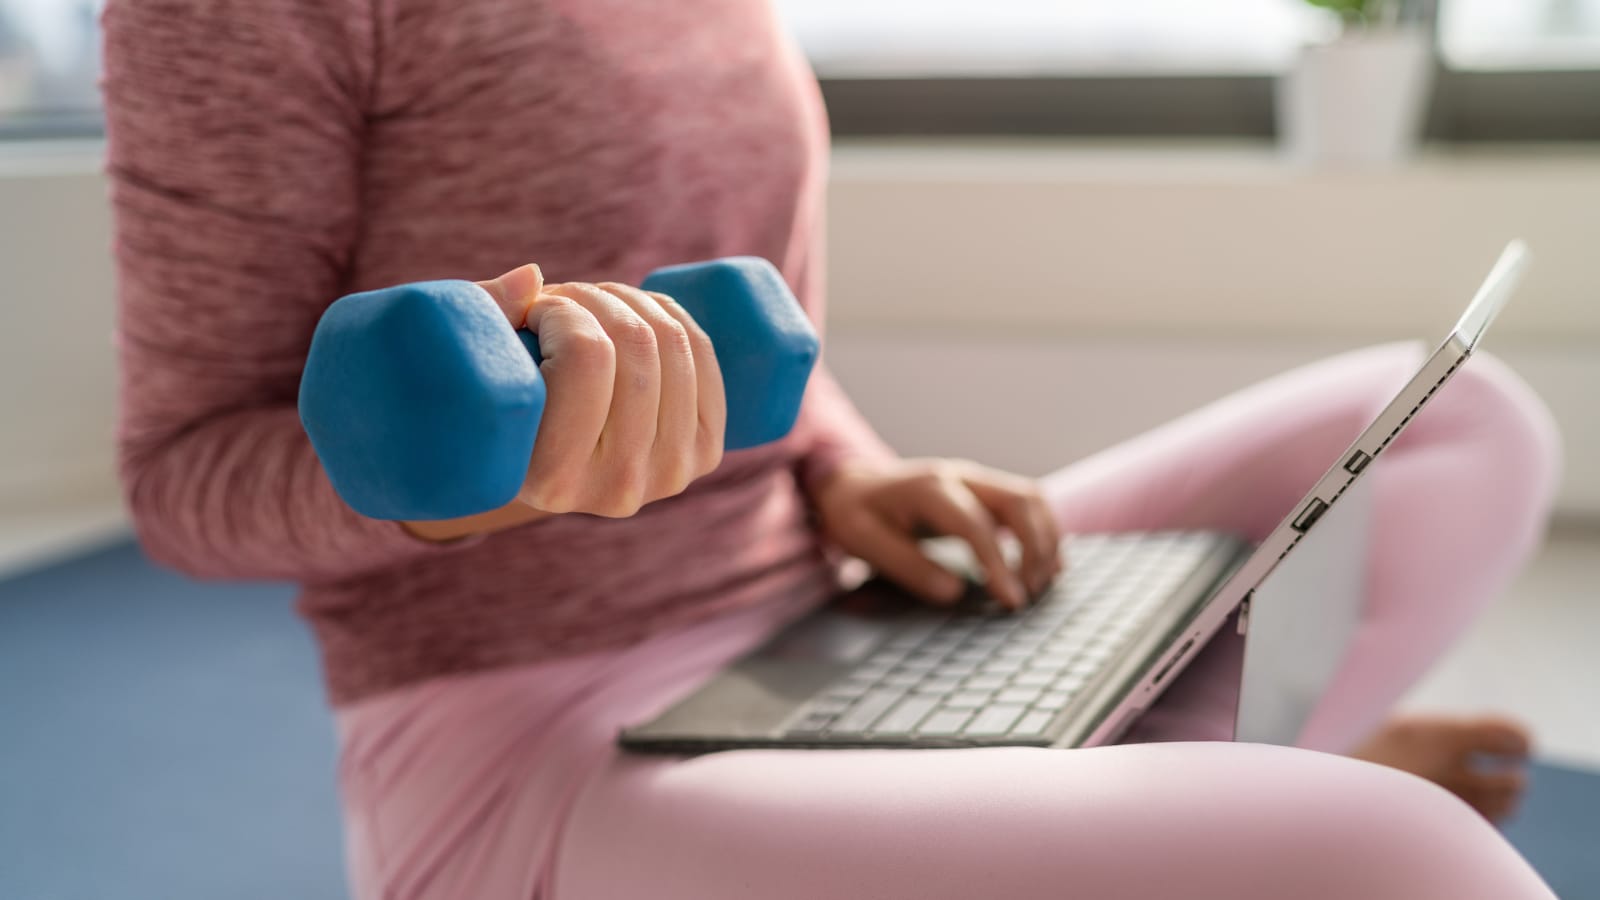 Woman working on laptop with one hand and holding a dumbbell with the other